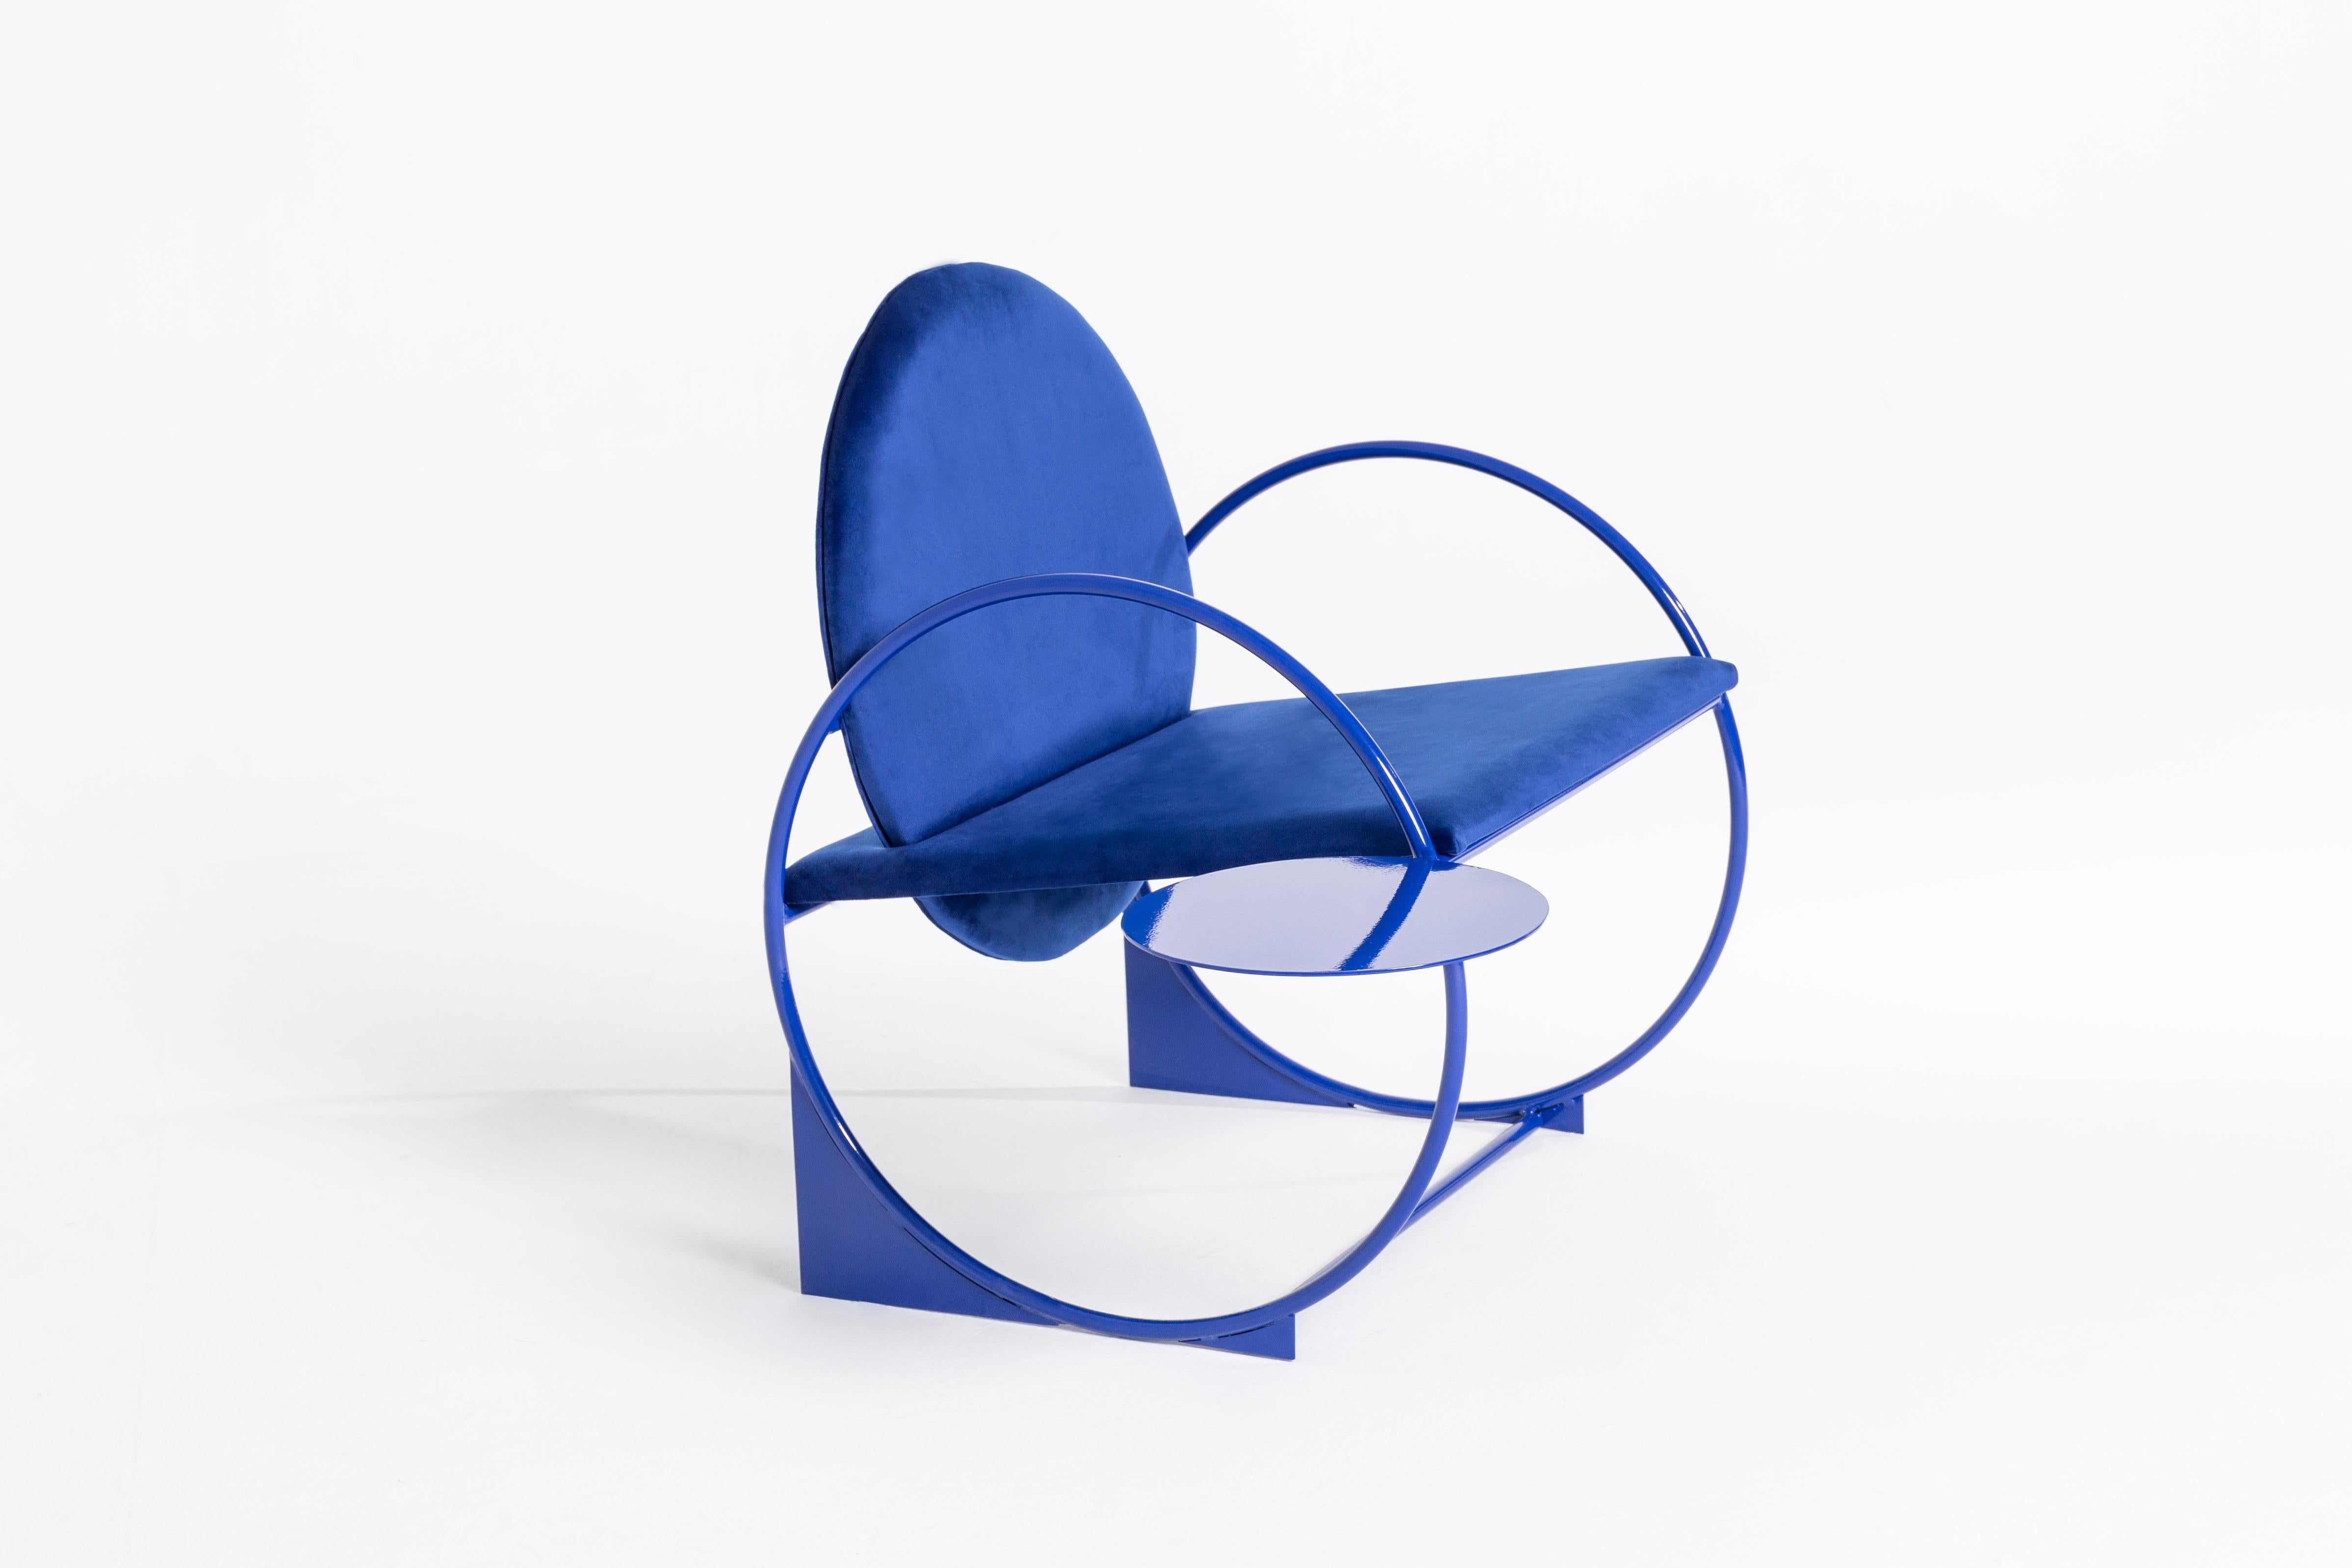 Bullarengue armchair by Ángel Mombiedro
Cm : 100 x 70 x 40 seat 80 back cm 
Inches: 35 x 28 x 16 seat 32 back in
RAL metallic structure with synthetic velvet seat. Side-tray included
Can be made to order in other colors/dimensions upon